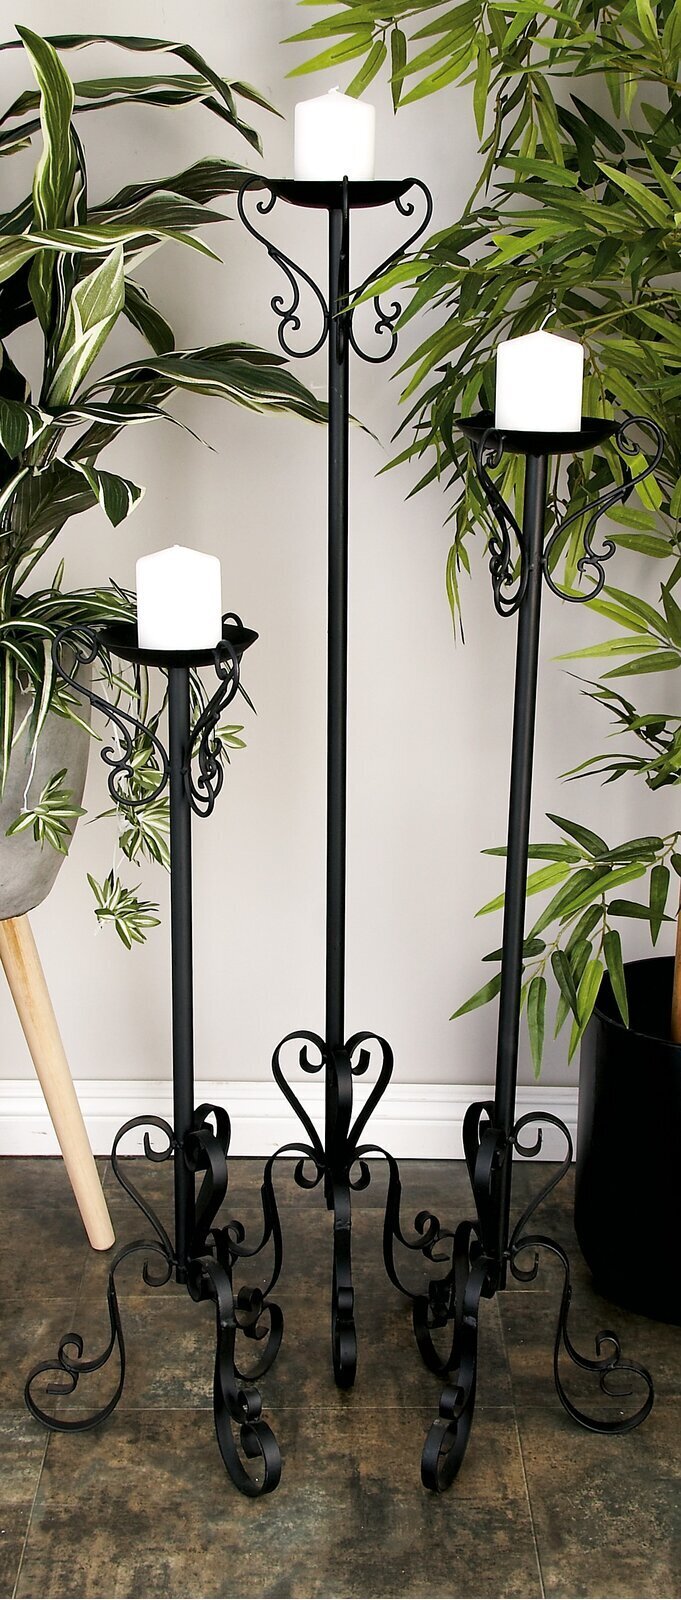 Wrought iron floor candle holders in a decreasing order